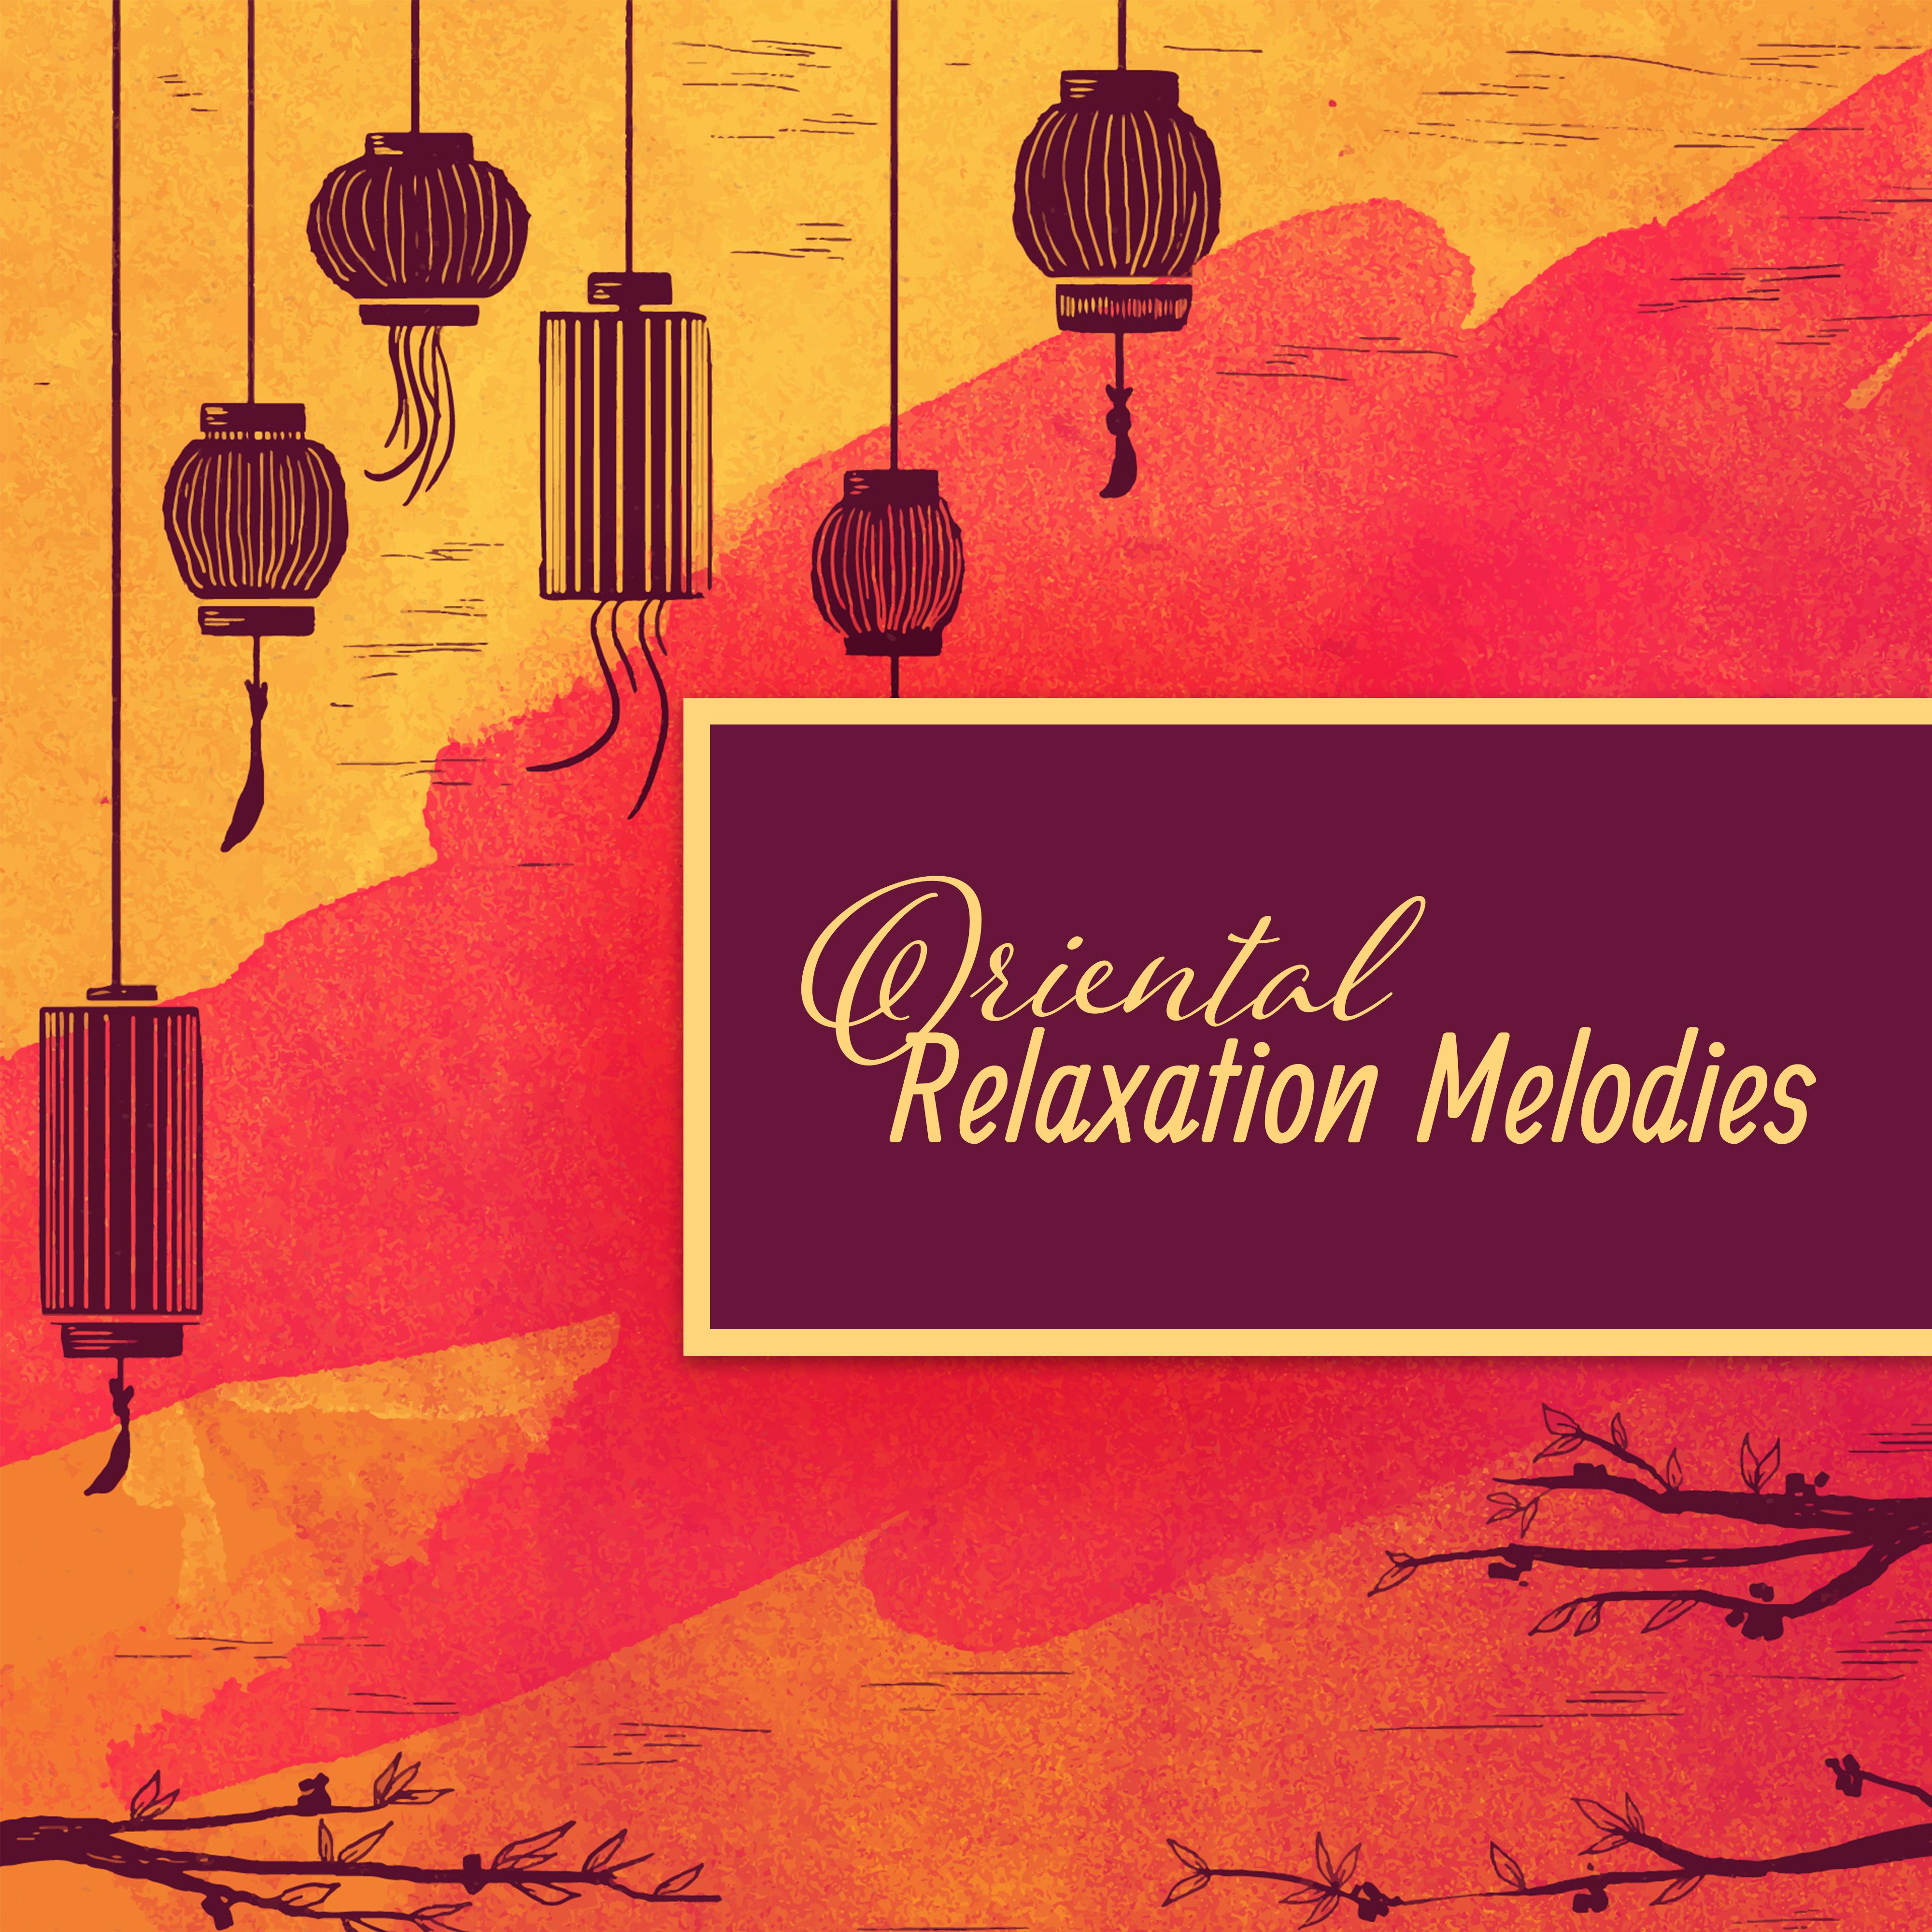 Oriental Relaxation Melodies